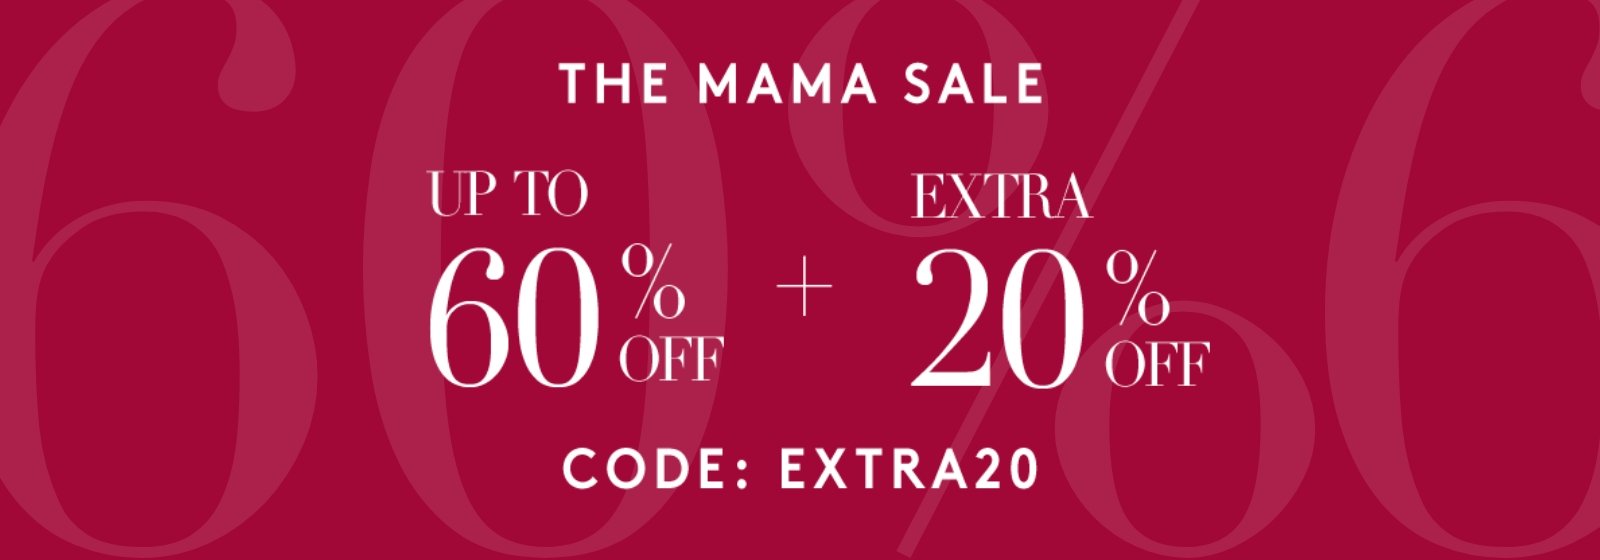 UP TO 60% OFF SELECTED LINES + EXTRA 20% OFF WITH CODE: EXTRA20